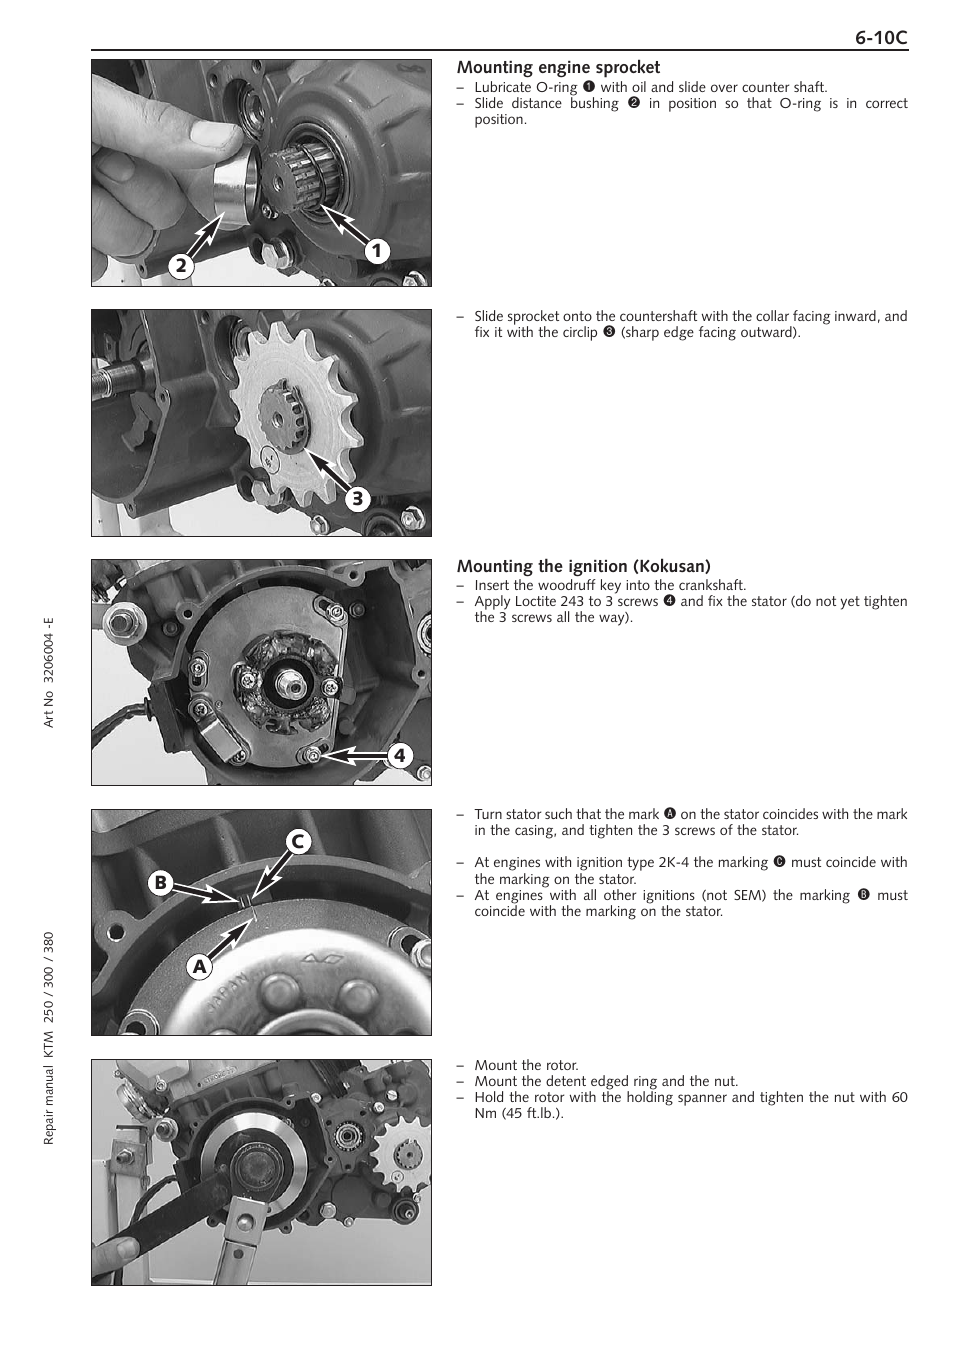 Mounting engine sprocket, Mounting the ignition (kokusan), 12 3 4 a b c | KTM 250 SX User Manual | Page 65 / 153